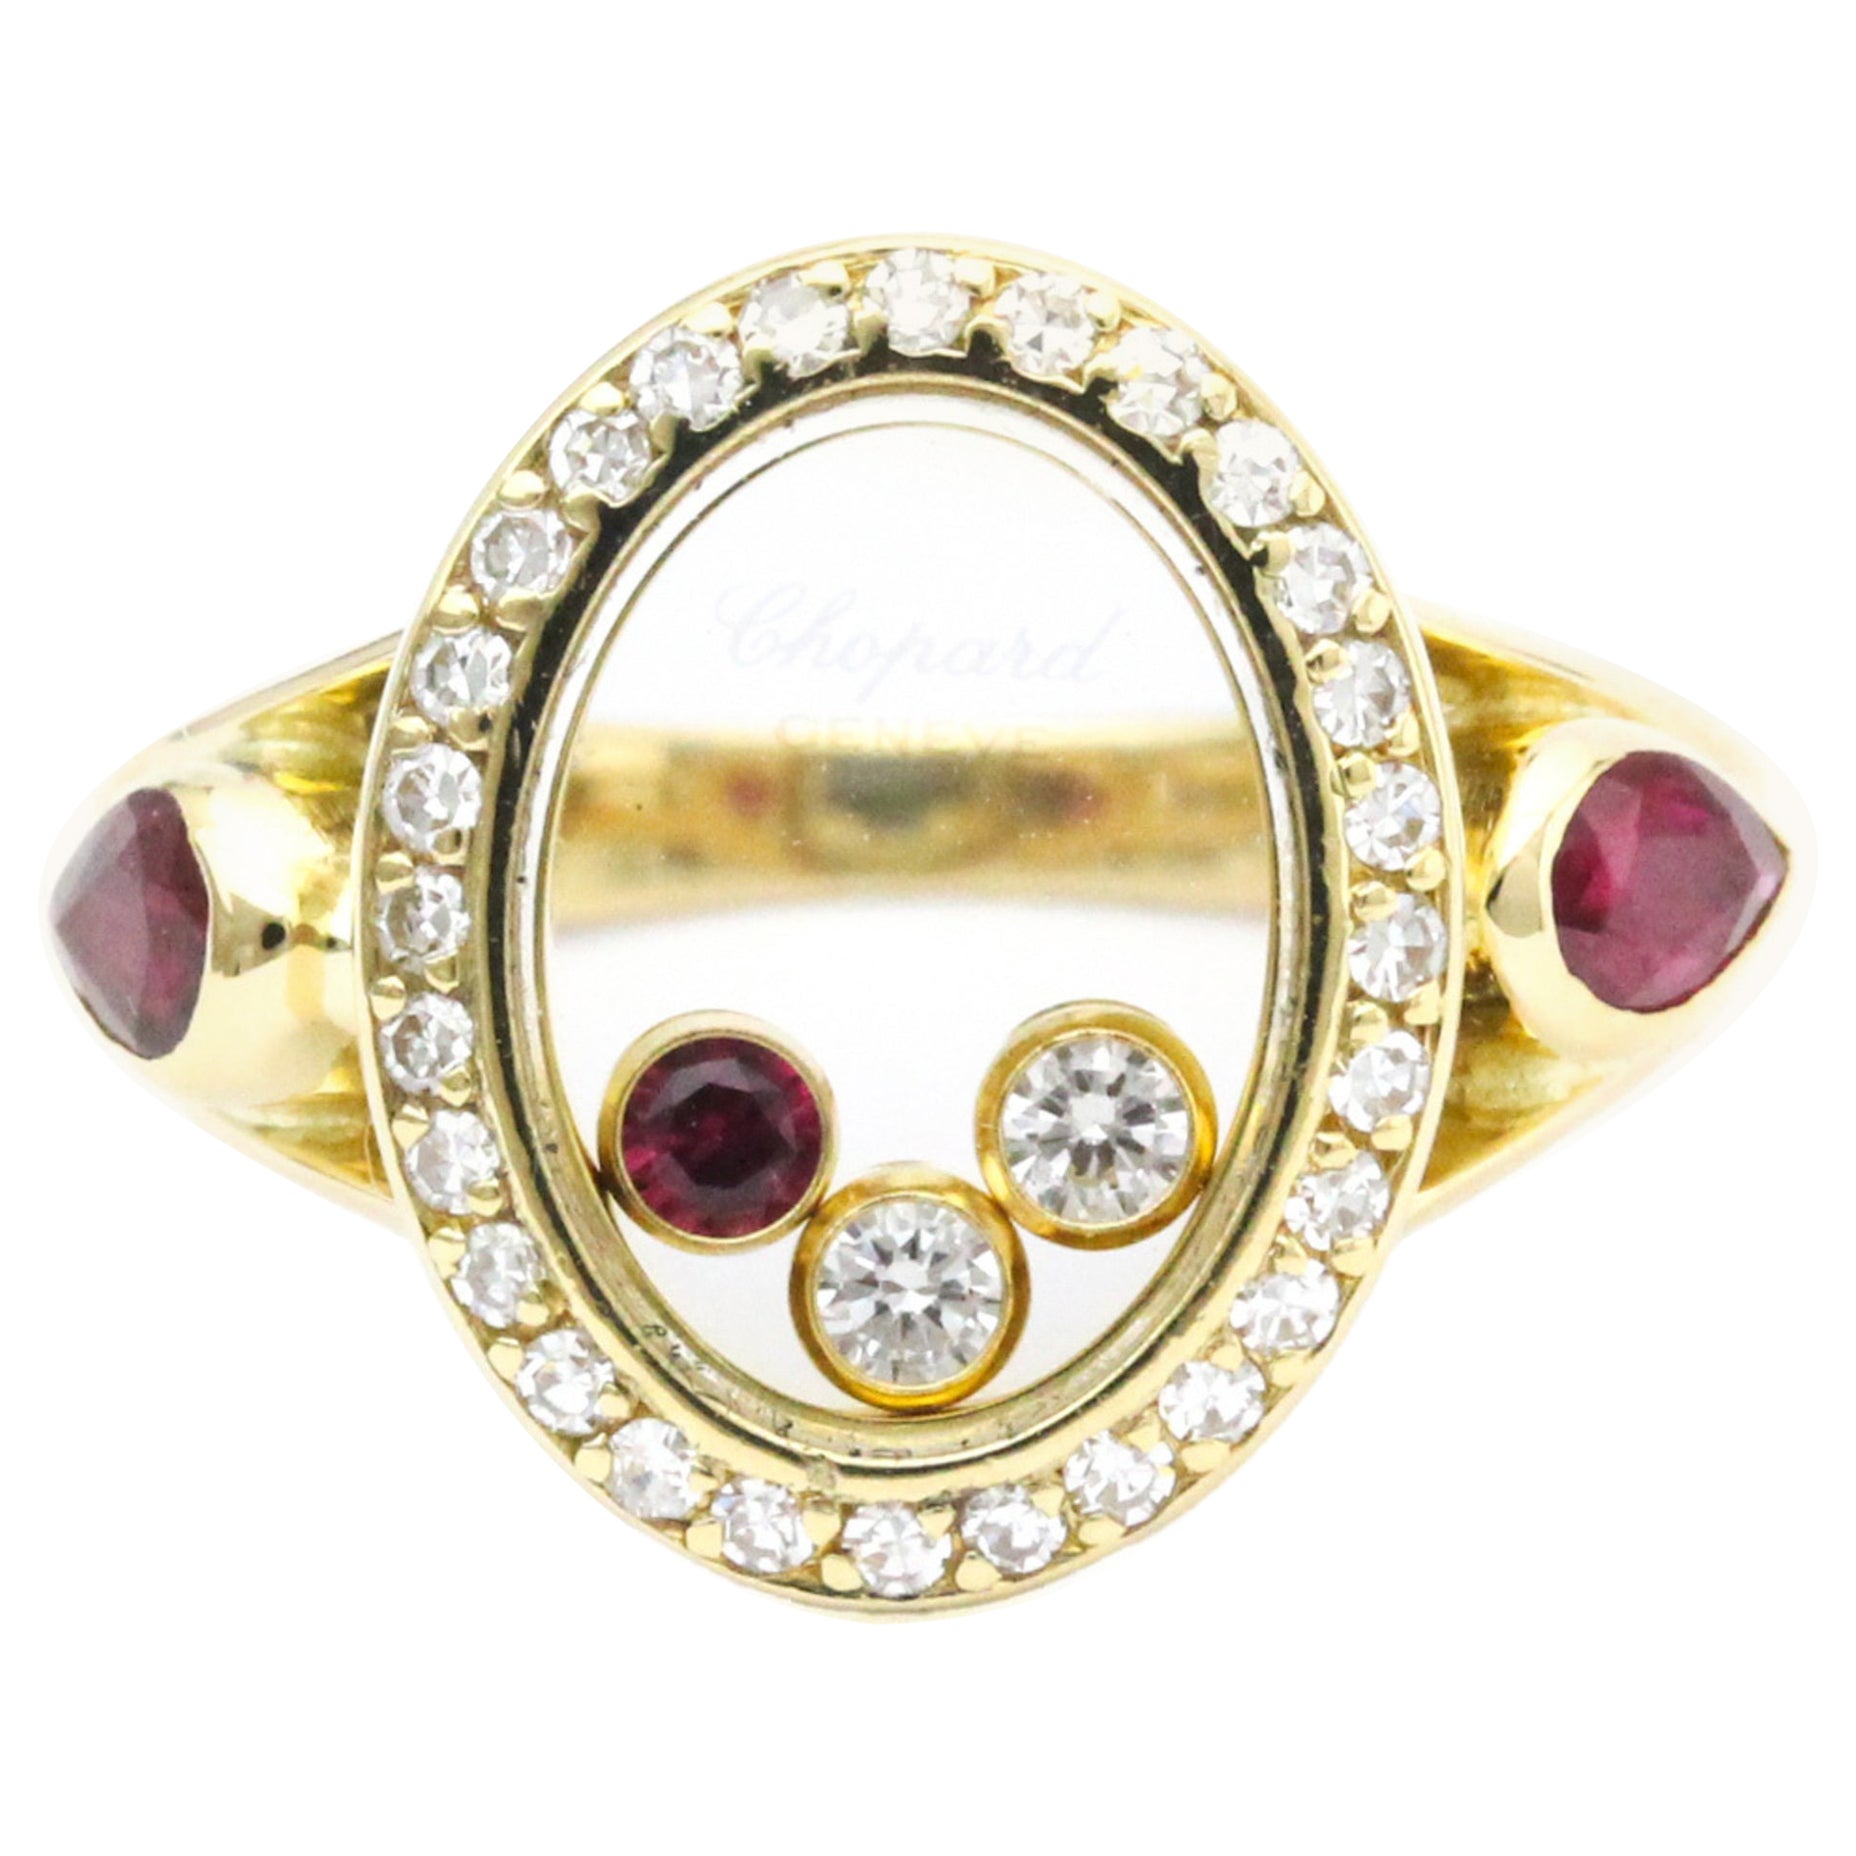 Chopard Oval Diamond, Ruby Band Ring in 18K Yellow Gold